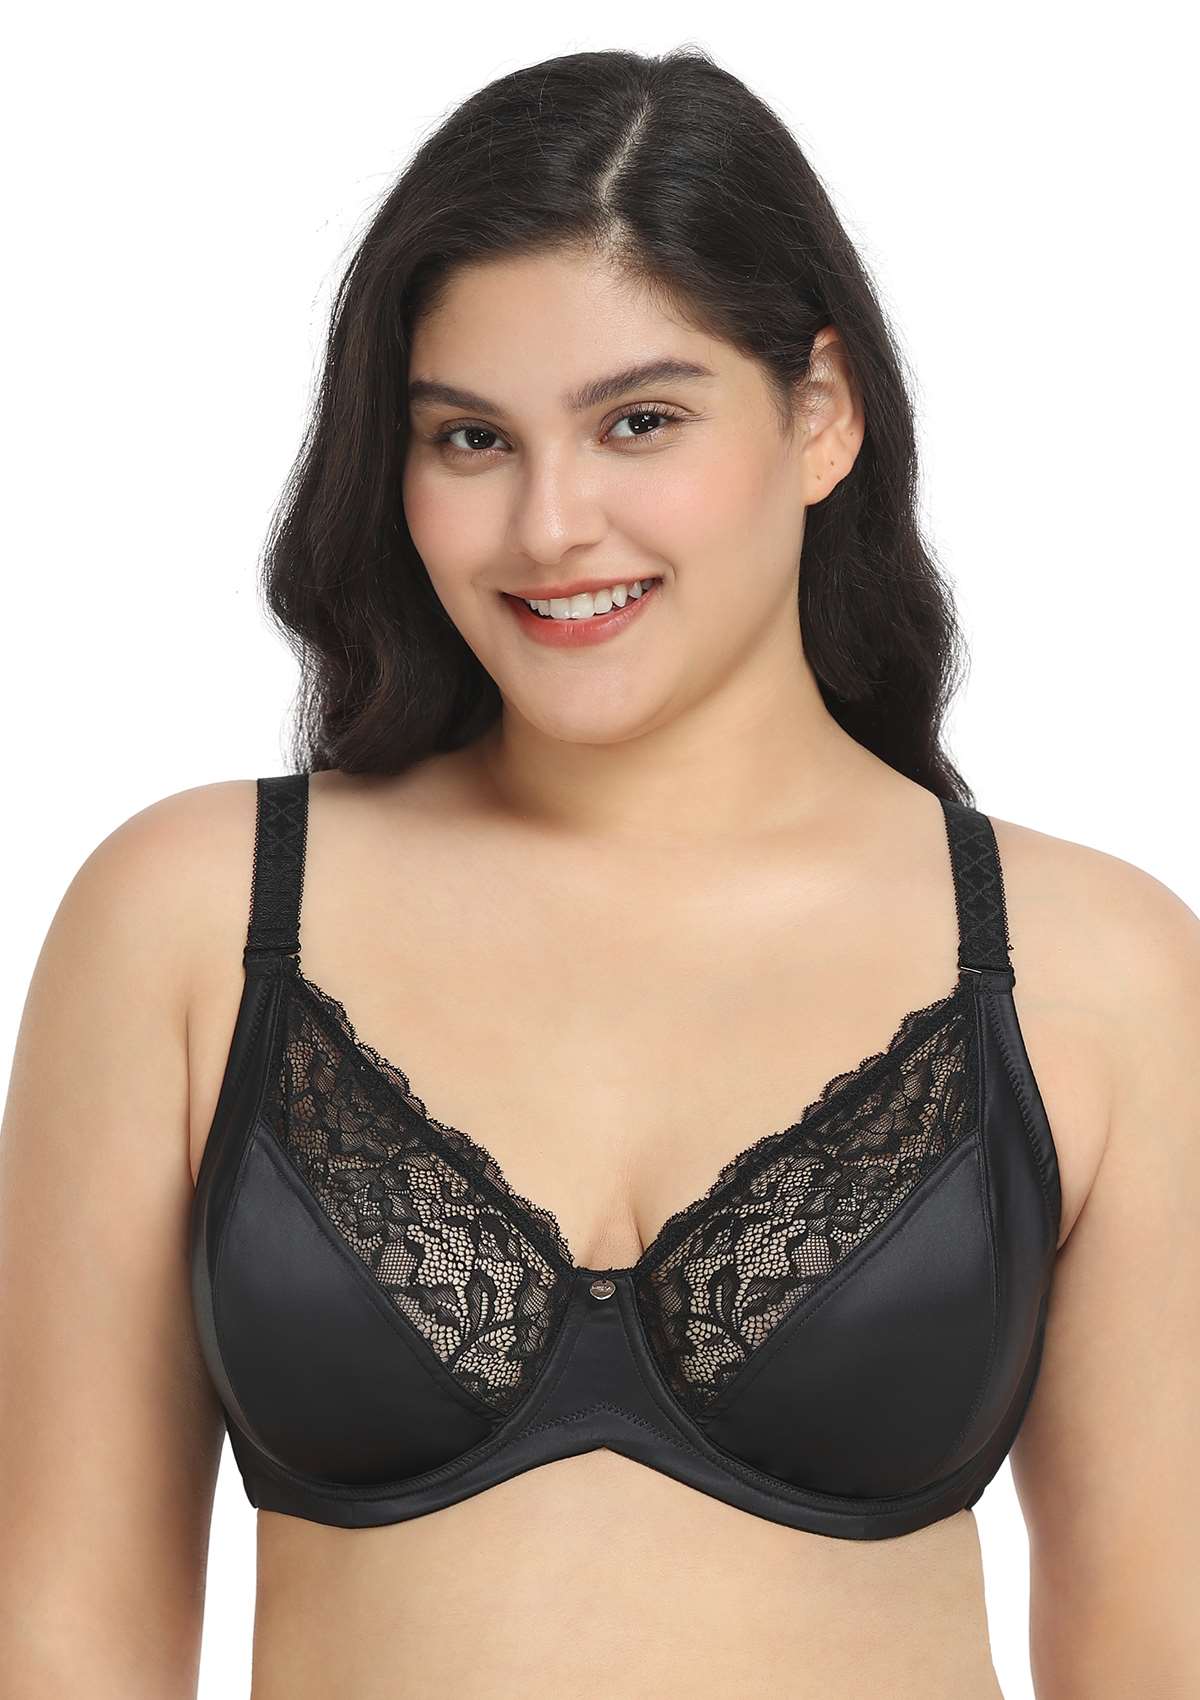 HSIA Foxy Satin Silky Full Coverage Underwire Bra With Floral Lace Trim - Black / 42 / H